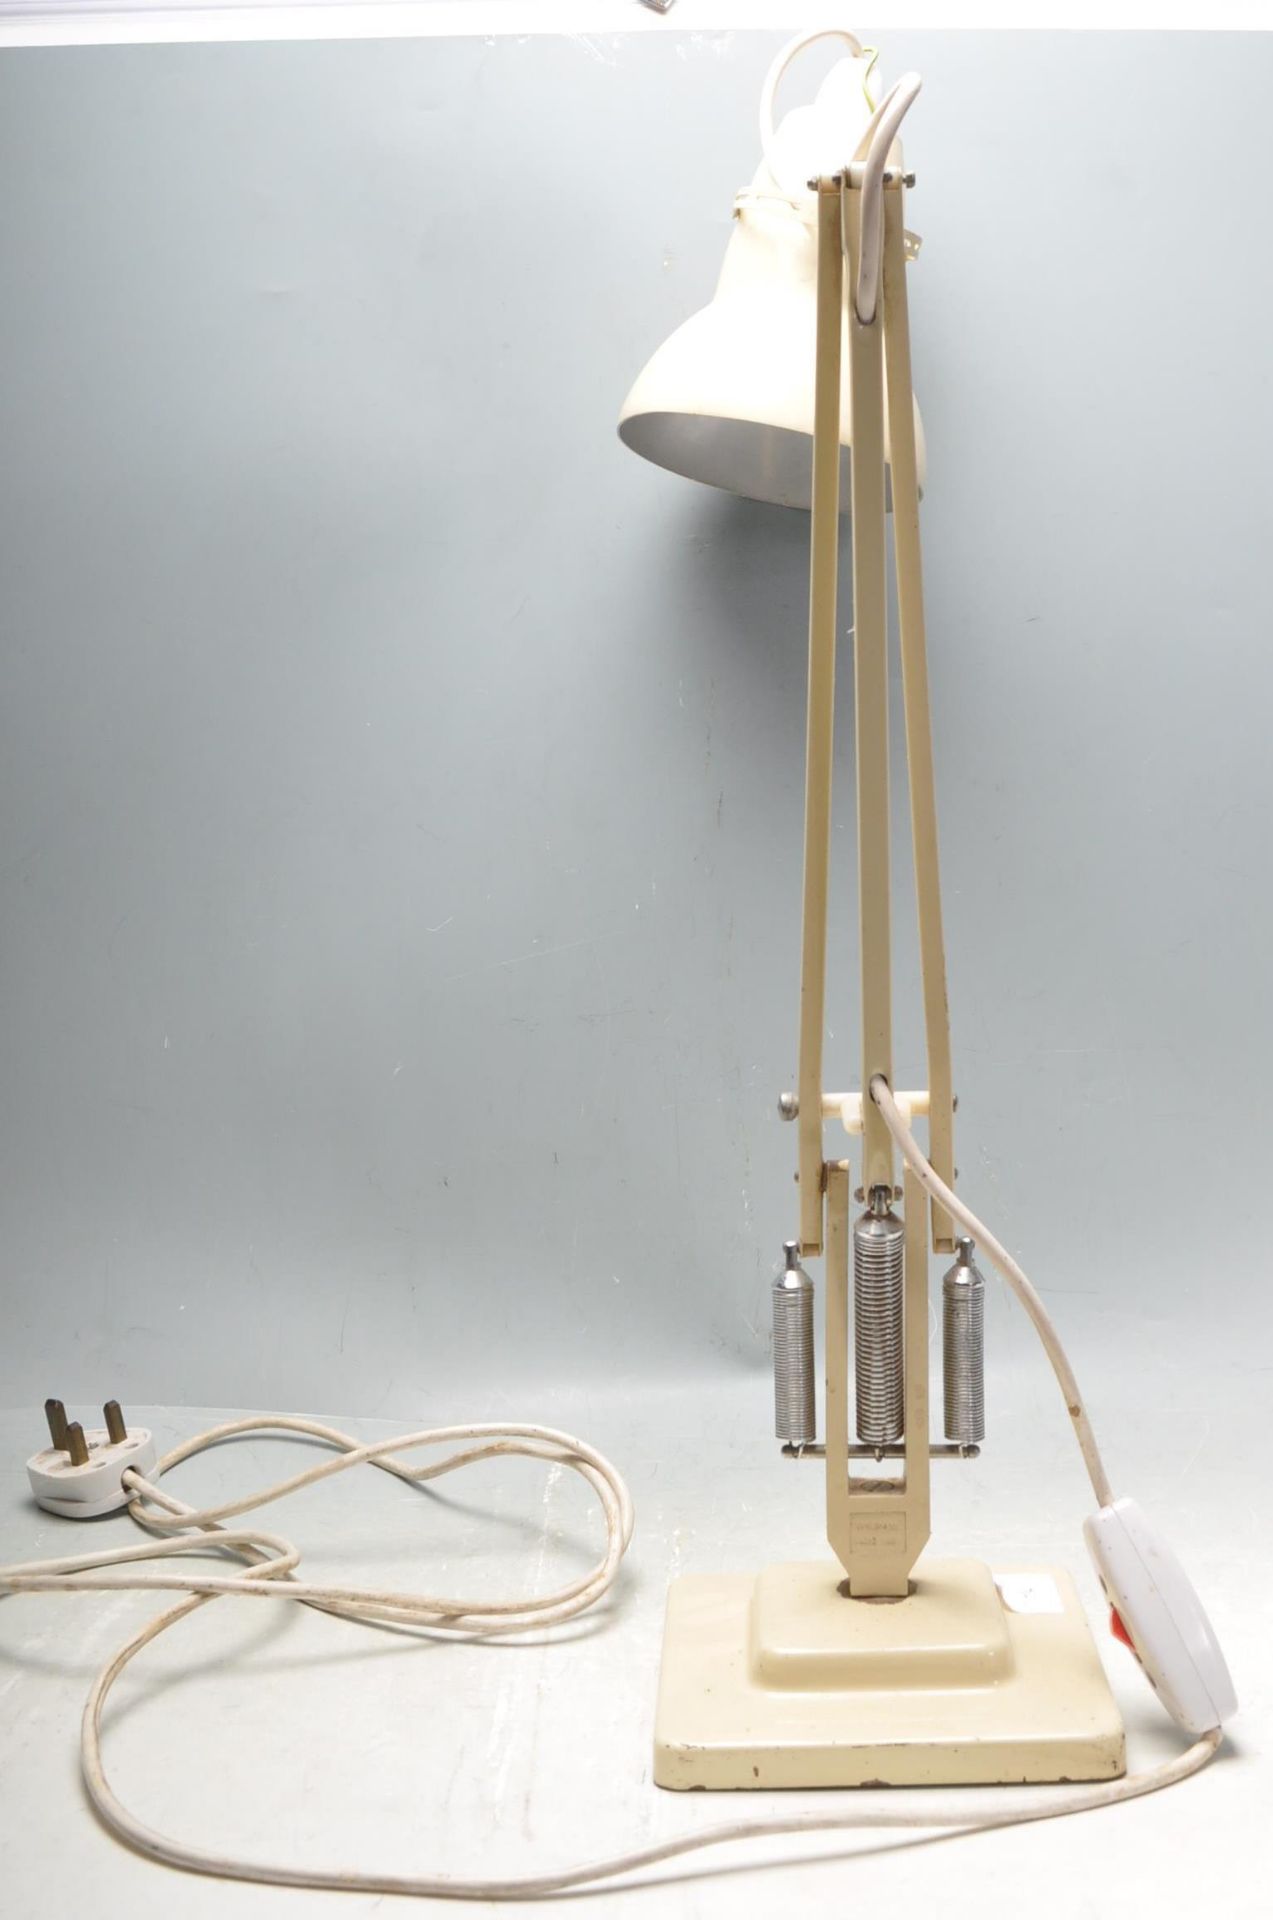 HERBERT TERRY MID CENTURY ANGLE POISE LAMP - Image 4 of 5